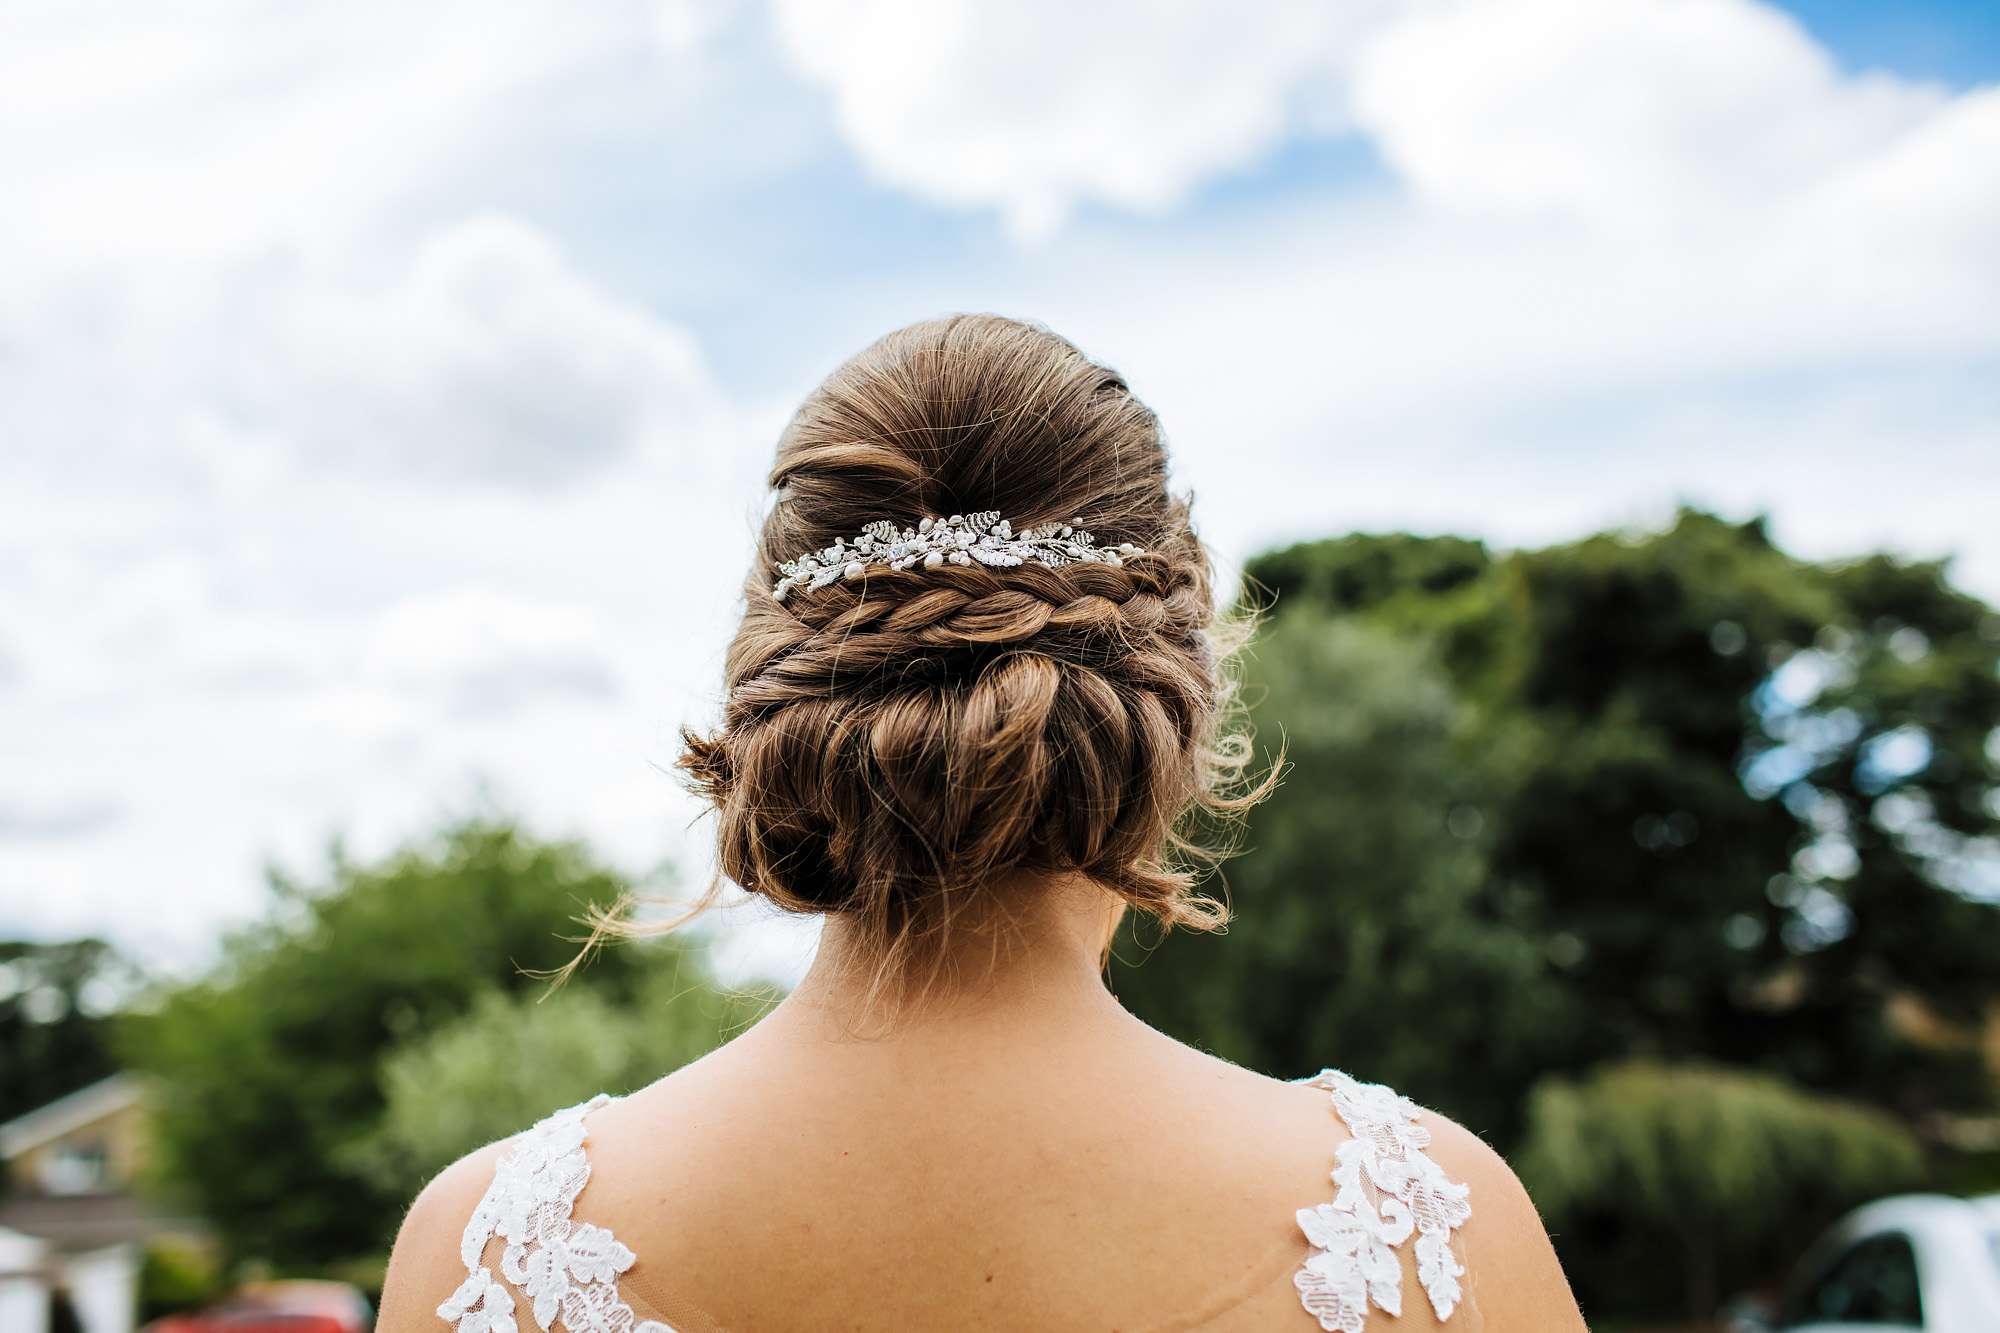 Detail of the bride's hair and hairpiece